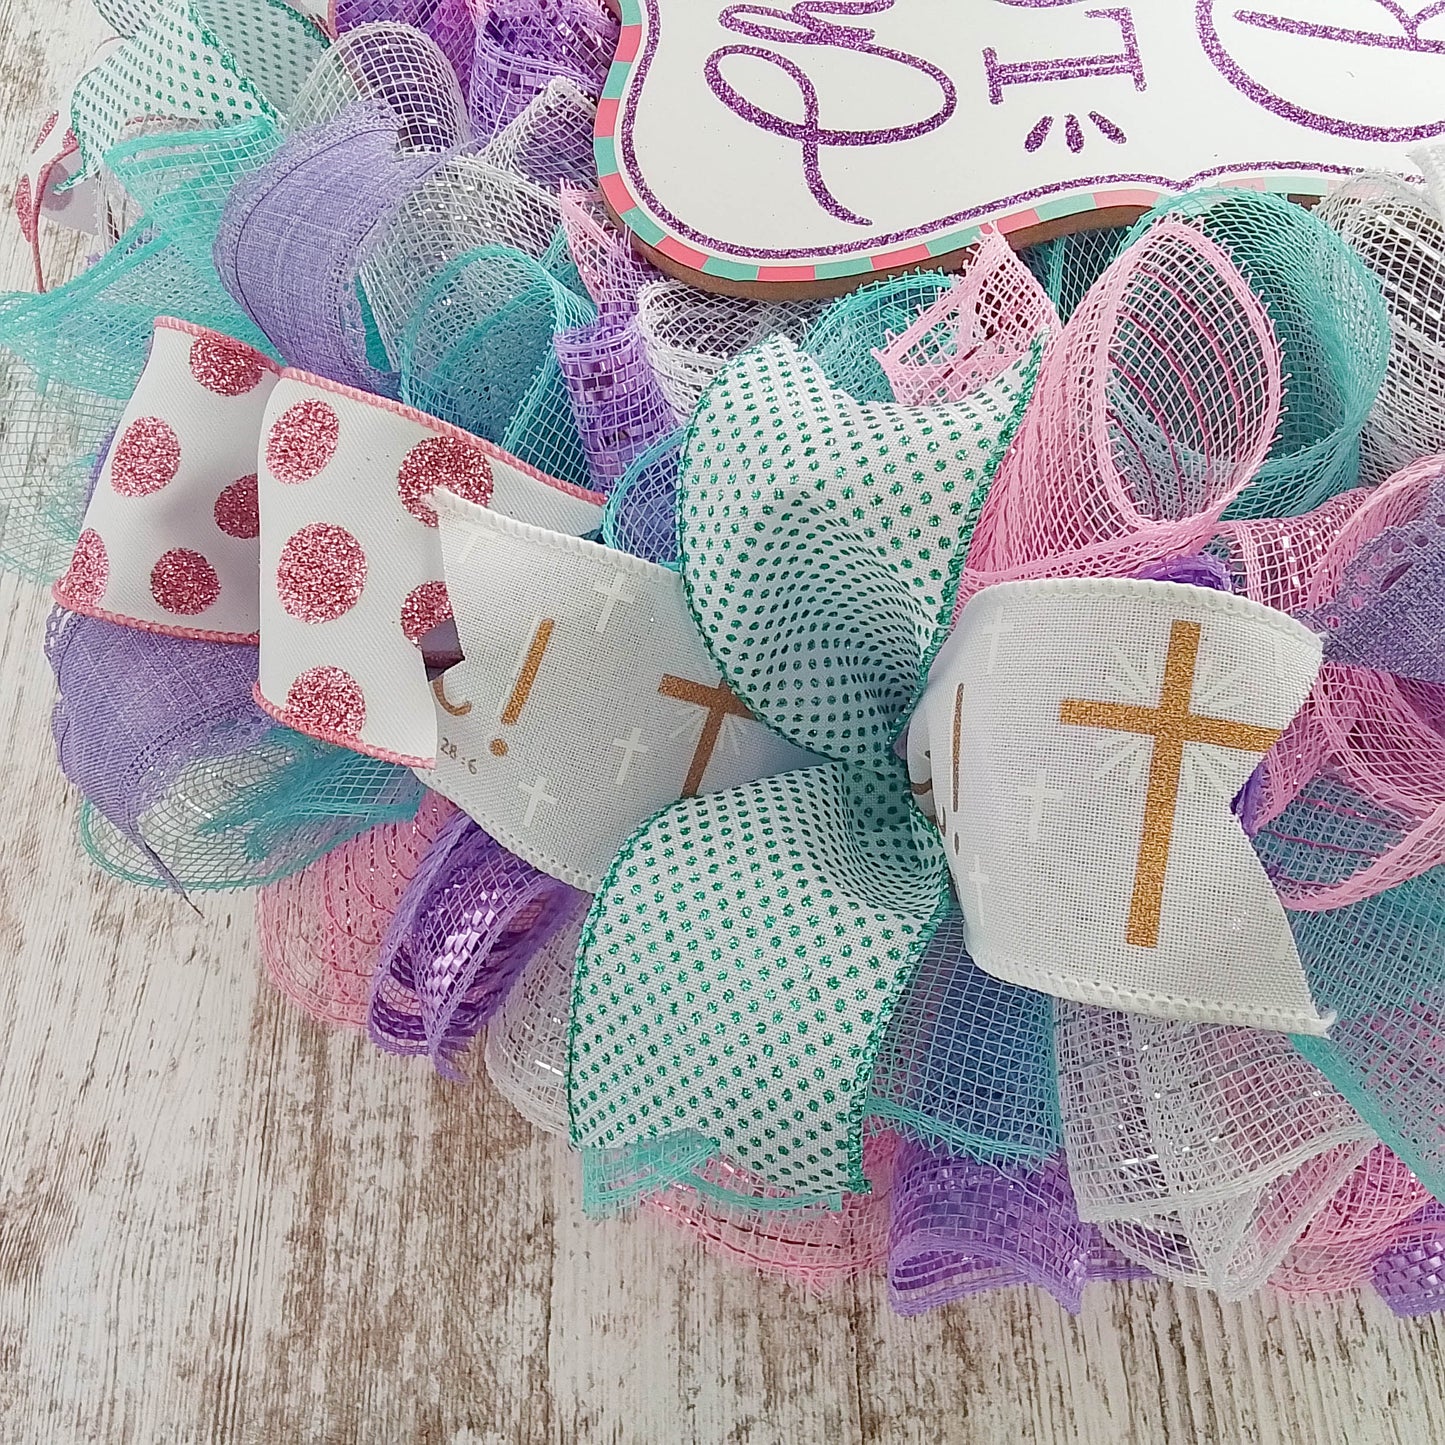 Christ Lord Risen Today Easter Front Door Wreath - Cross Present - Pink Lavender Mint Green Gold White